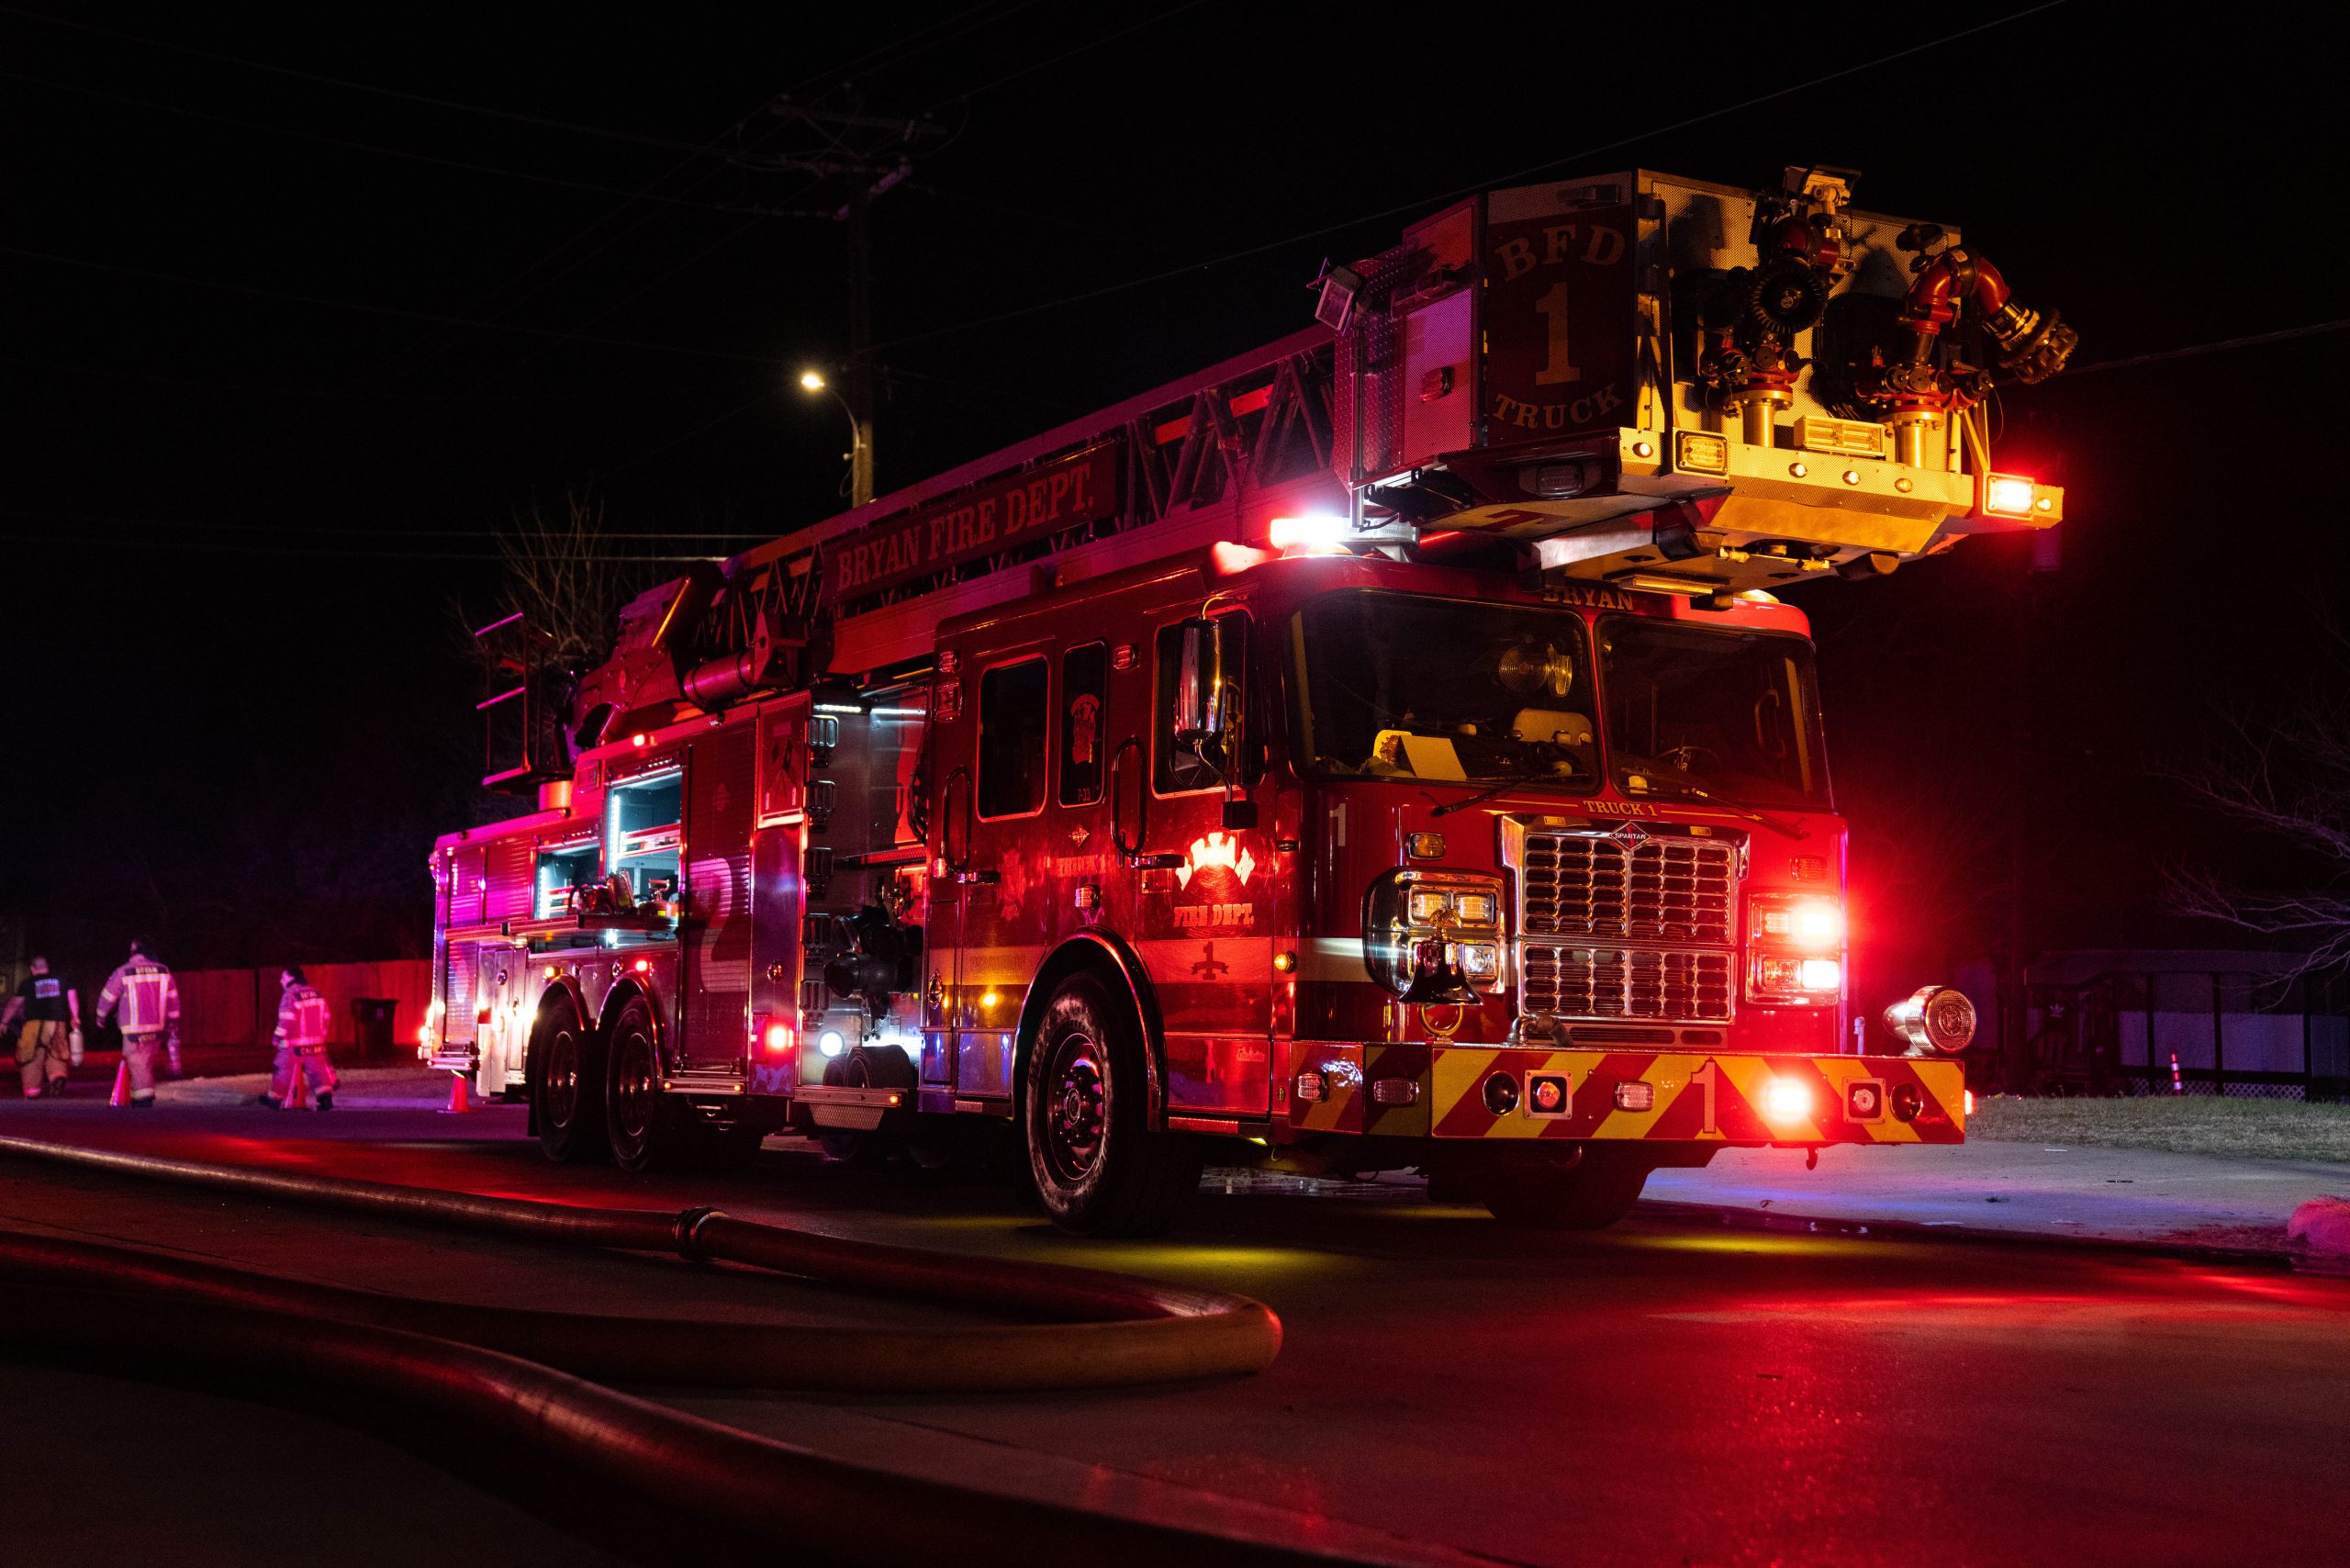 Photo of a Bryan fire truck with lights on at night. Firefighters working in the background.